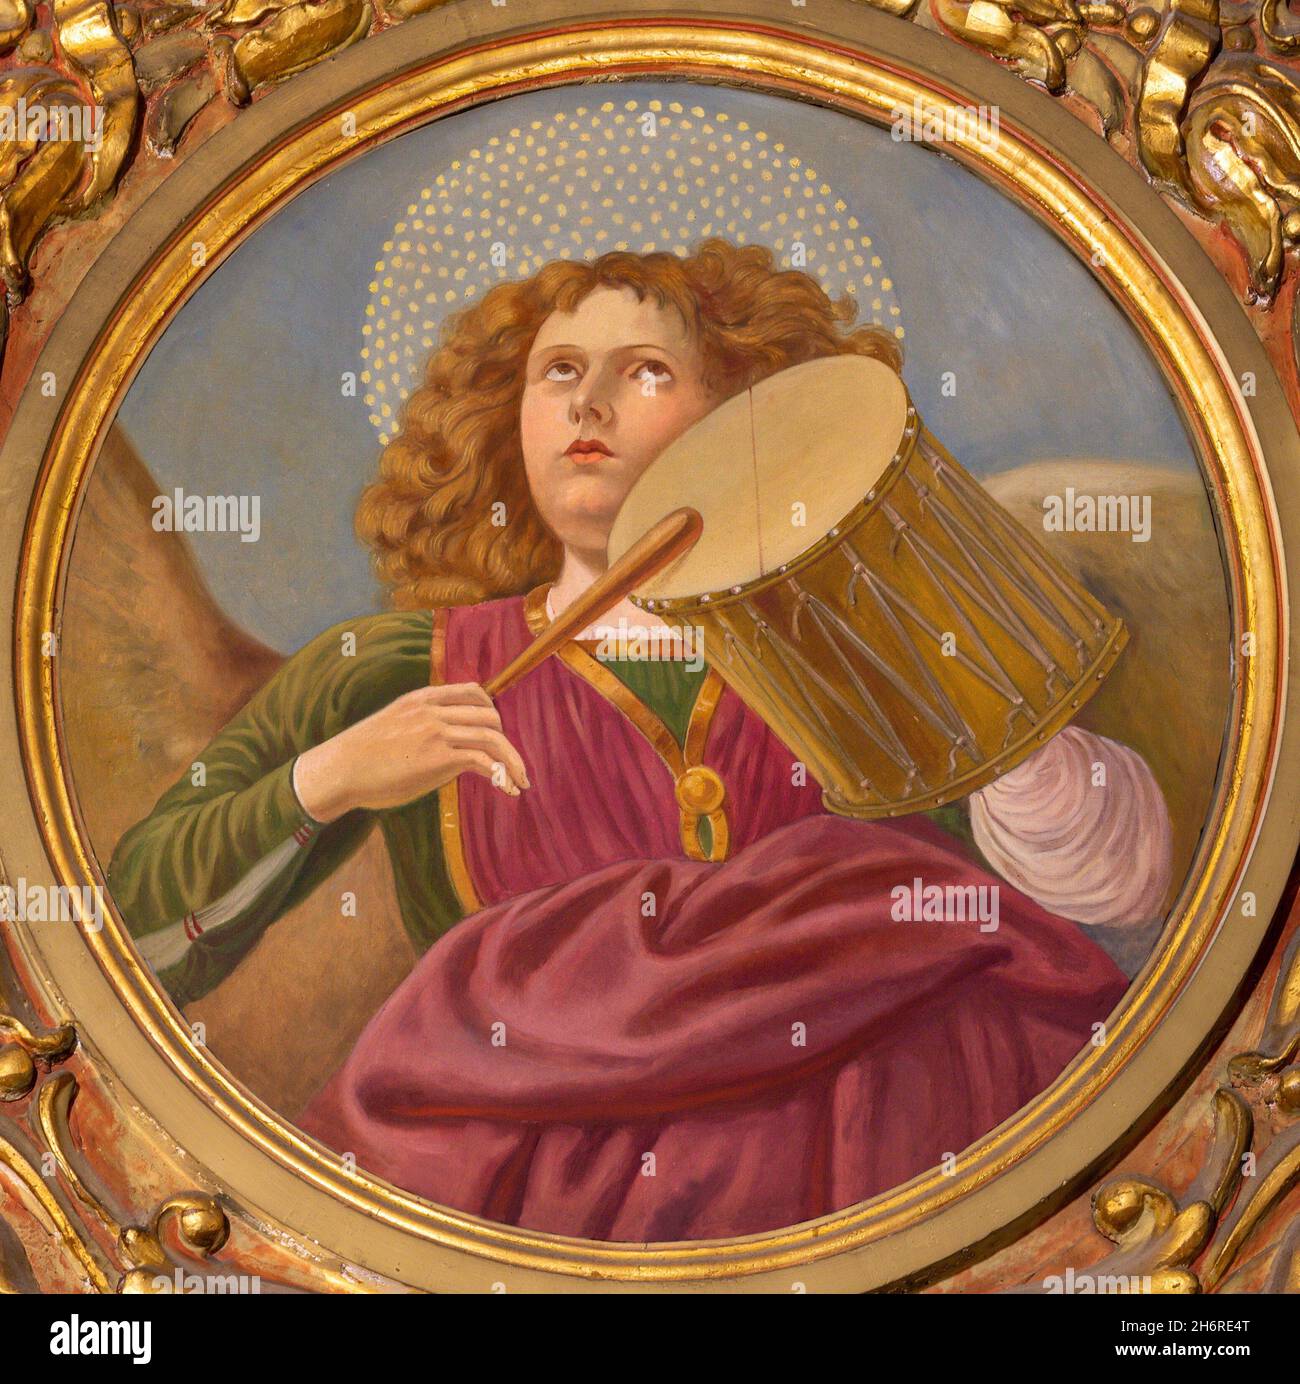 FORLÍ, ITALY - NOVEMBER 11, 2021: The fresco of angel with the drum in the Cattedrala di Santa Croce by Giovanni Secchi (1876 - 1950). Stock Photo